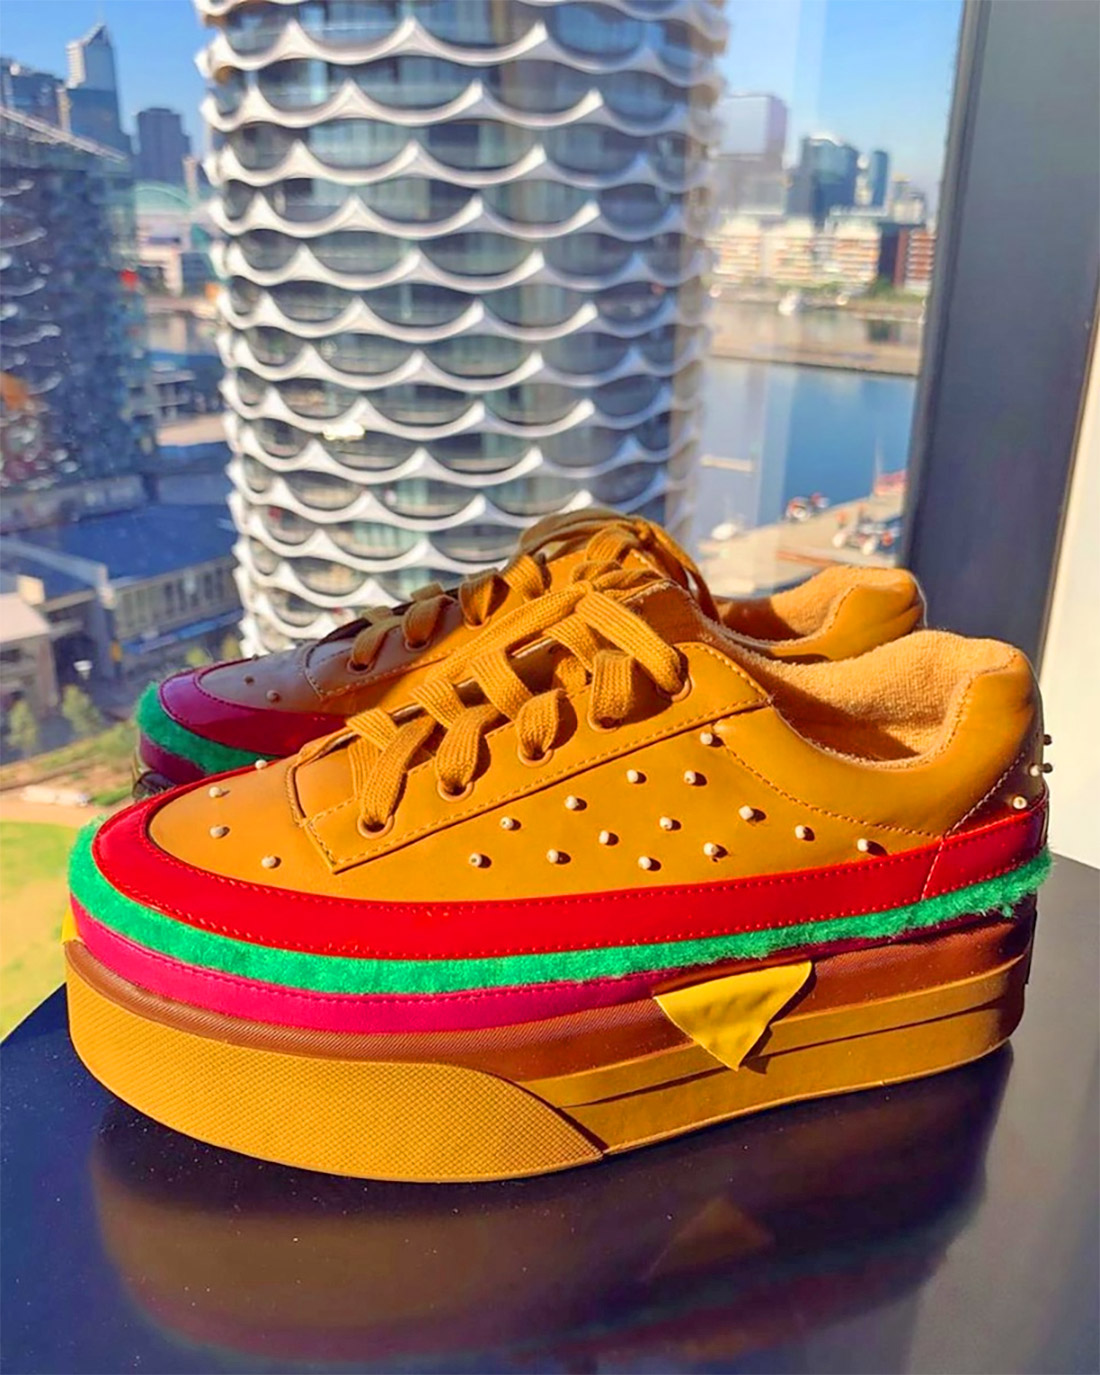 Peddling Pedestrian stomach These Cheeseburger Shoes Turn You Into a Walking Big Mac